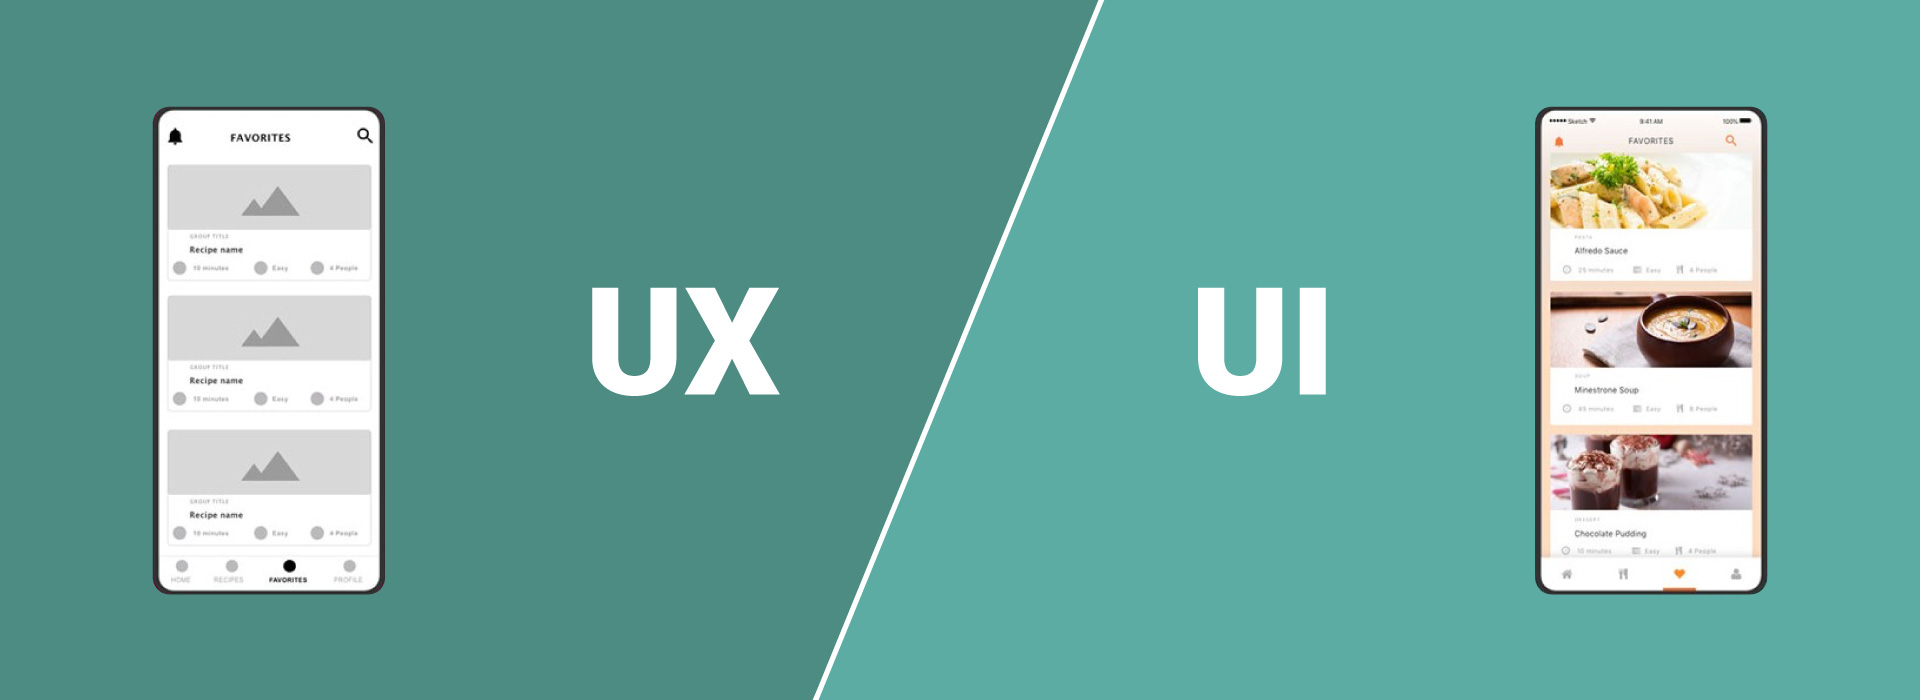 user-interface-user-experience-design